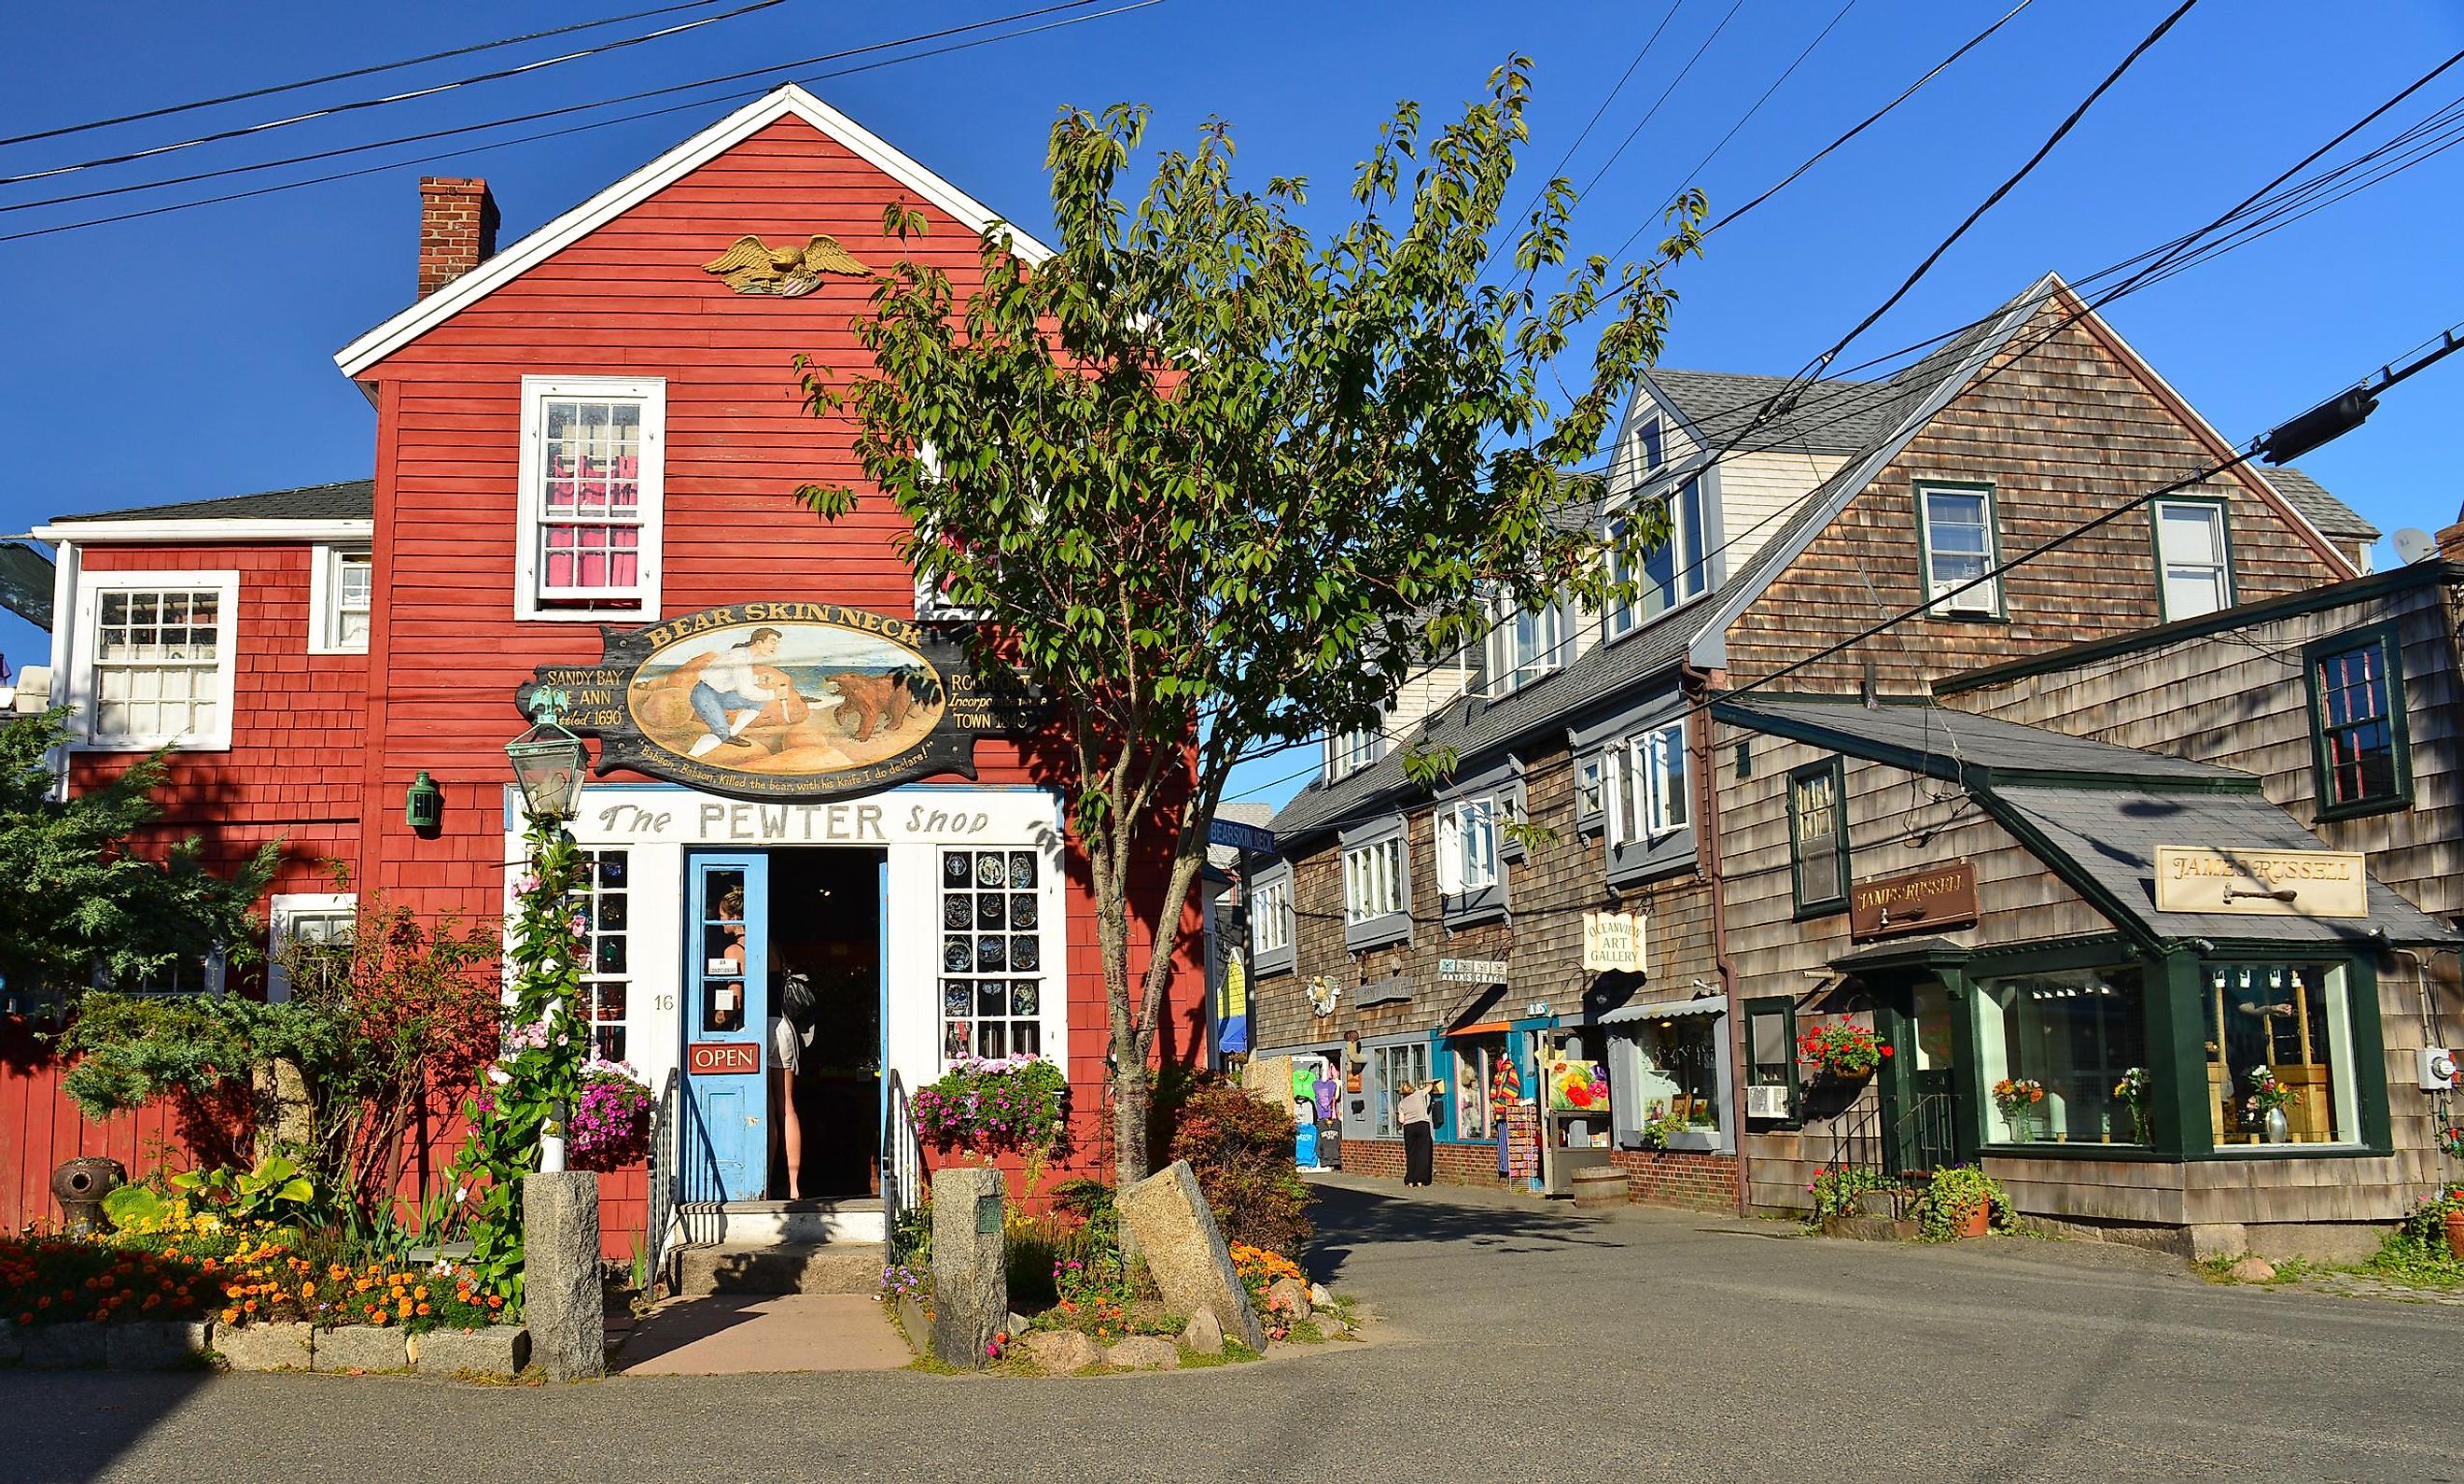 Rockport on september 20,2013. It is a town in Essex County, Massachusetts